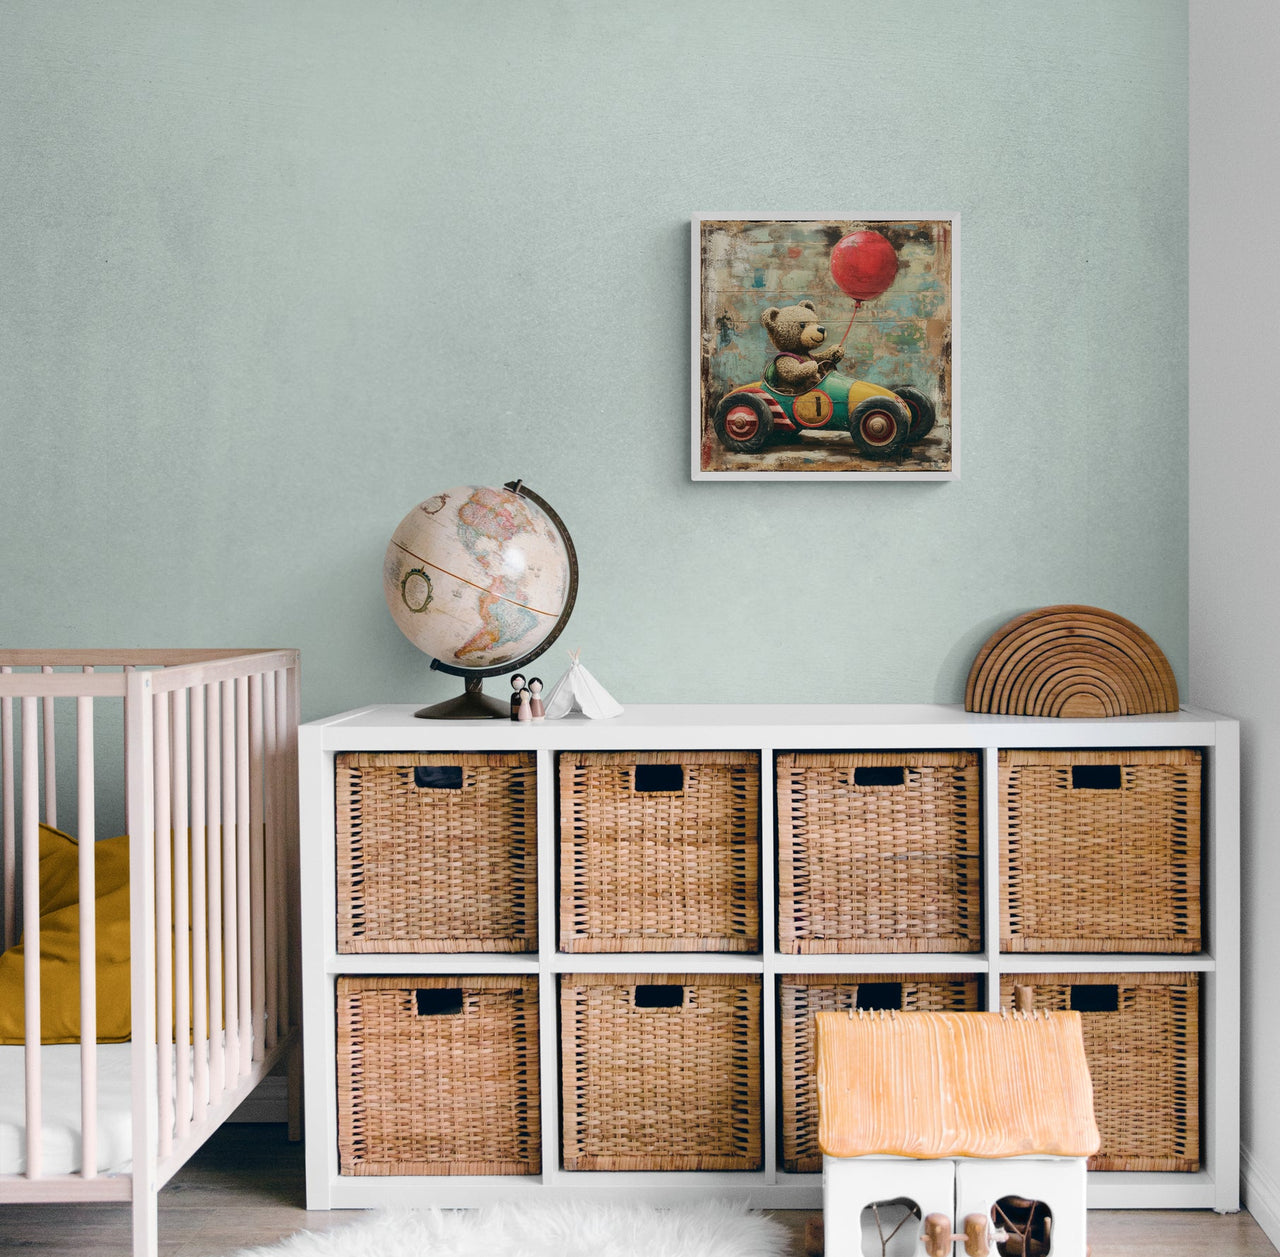 Charming nursery wall art from Milton Wes Art, featuring a teddy bear balancing a red balloon while riding a vintage toy car, creating a whimsical atmosphere in a child's room with light green walls and natural wicker storage